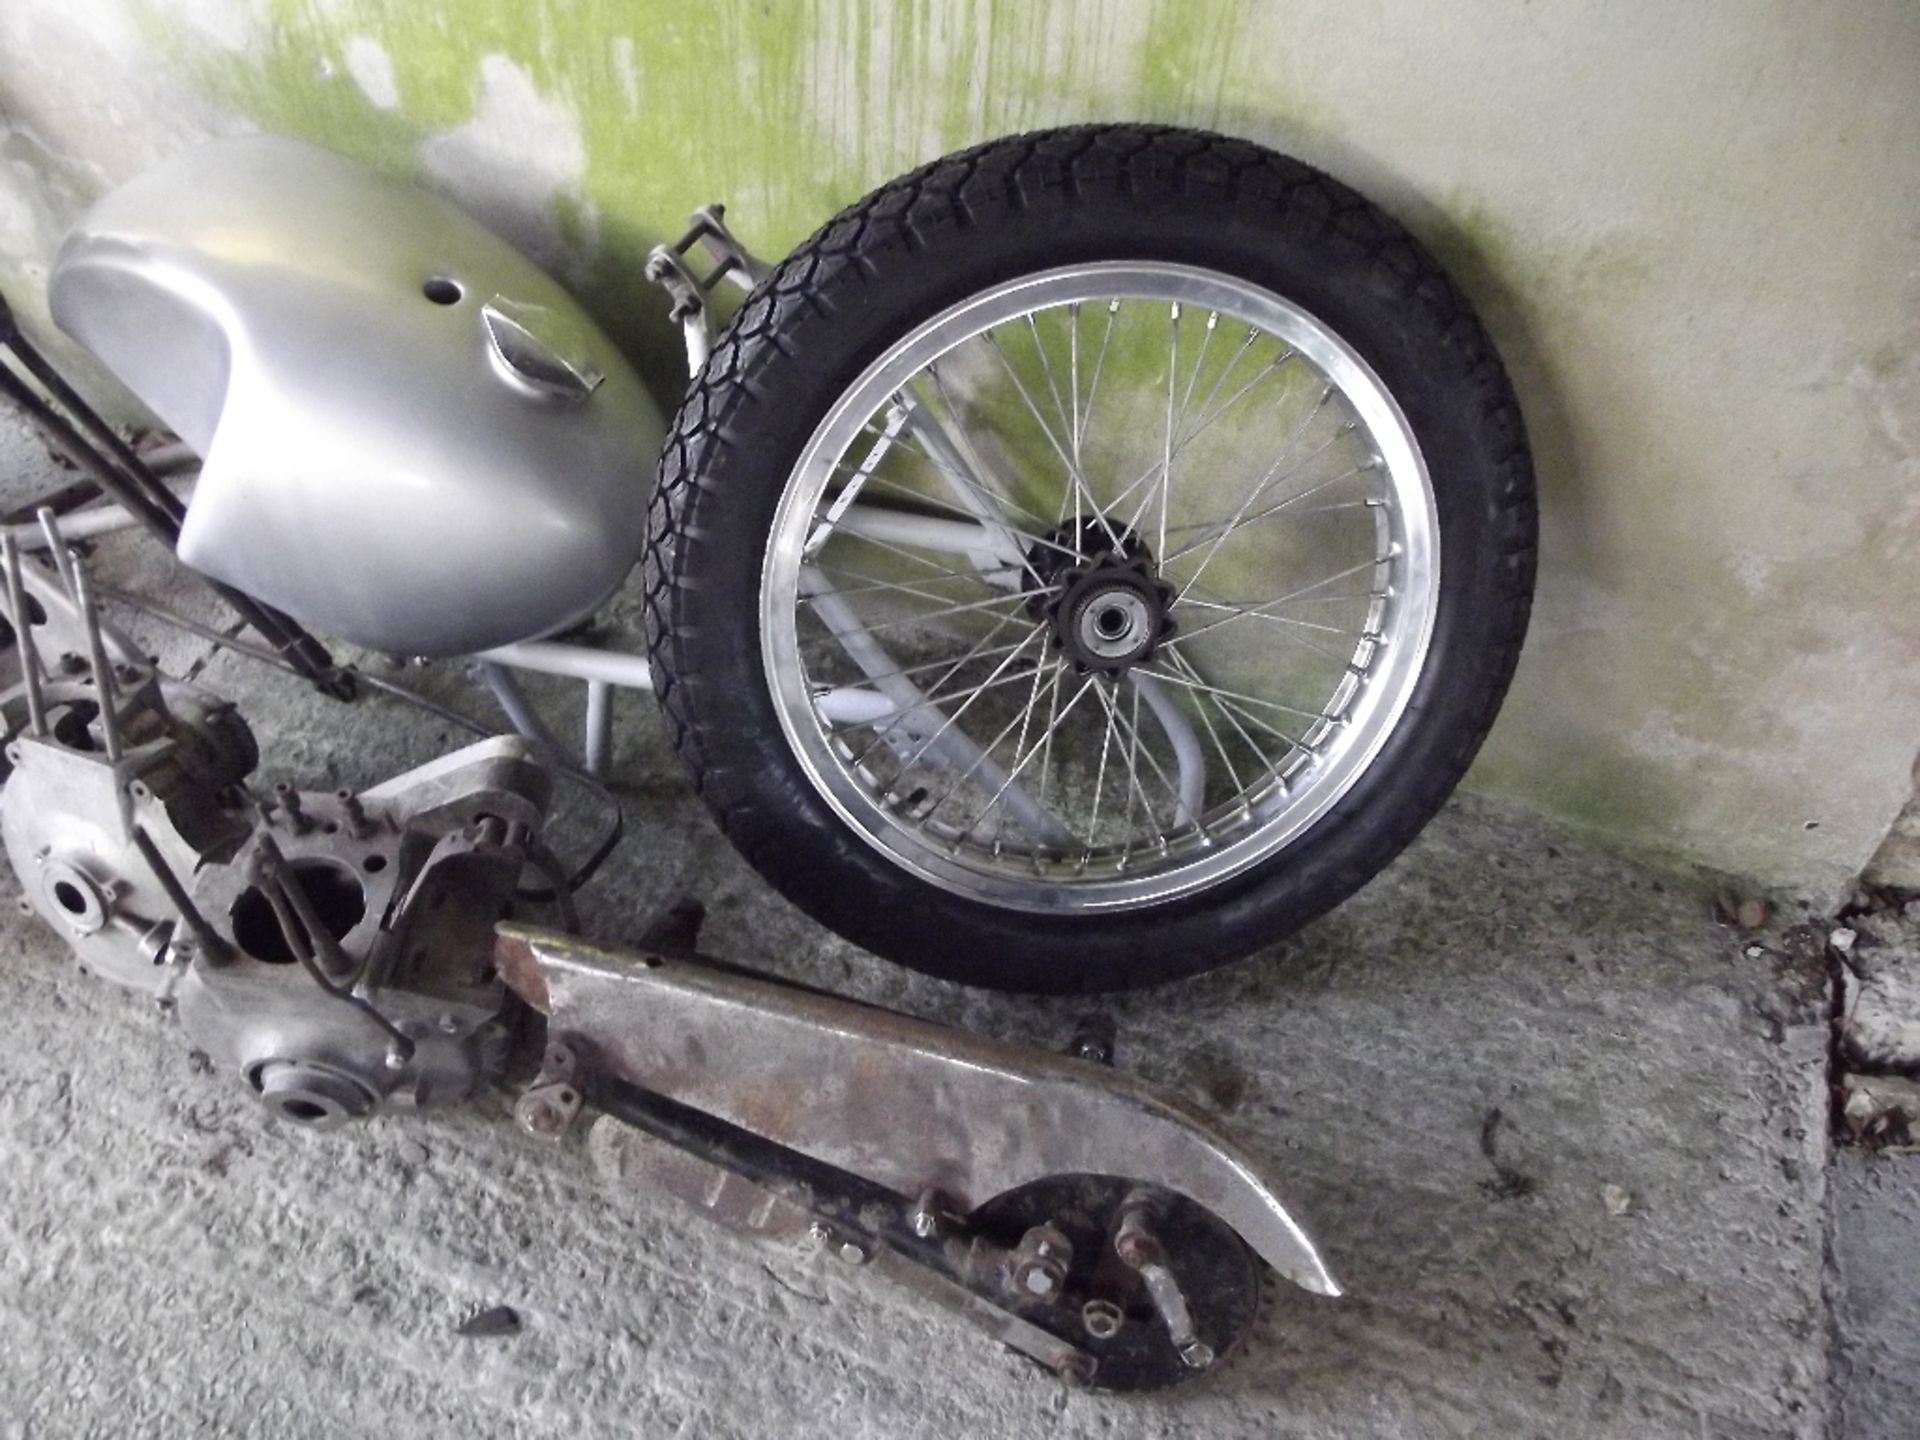 Assorted various British motorcycle components and spares, including a Matchless G3 crank case, - Image 6 of 6